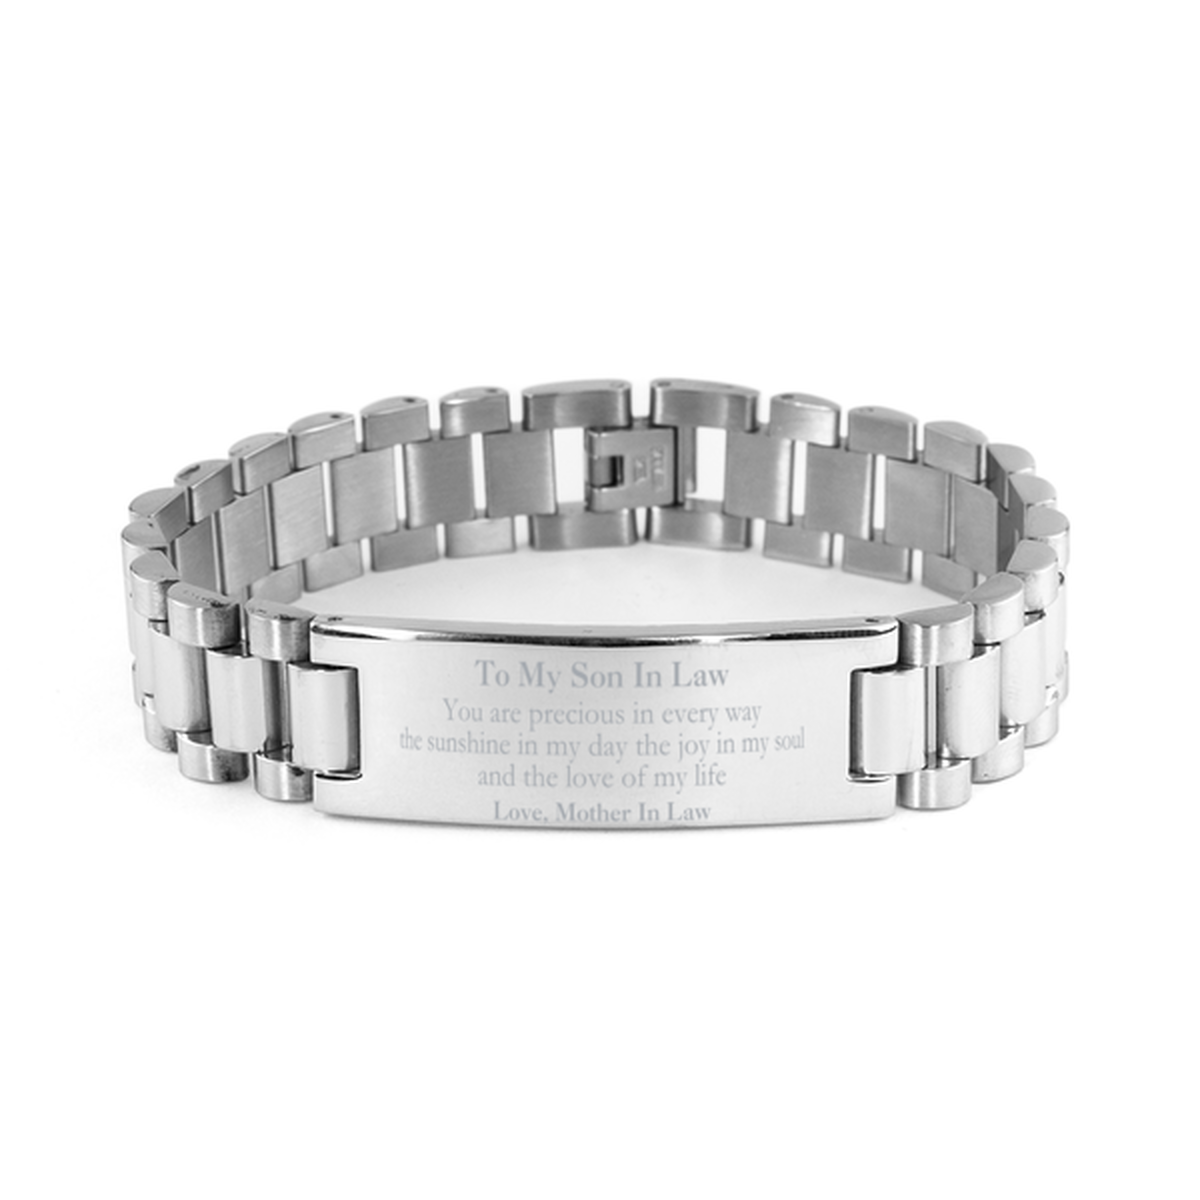 Graduation Gifts for Son In Law Ladder Stainless Steel Bracelet Present from Mother In Law, Christmas Son In Law Birthday Gifts Son In Law You are precious in every way the sunshine in my day. Love, Mother In Law